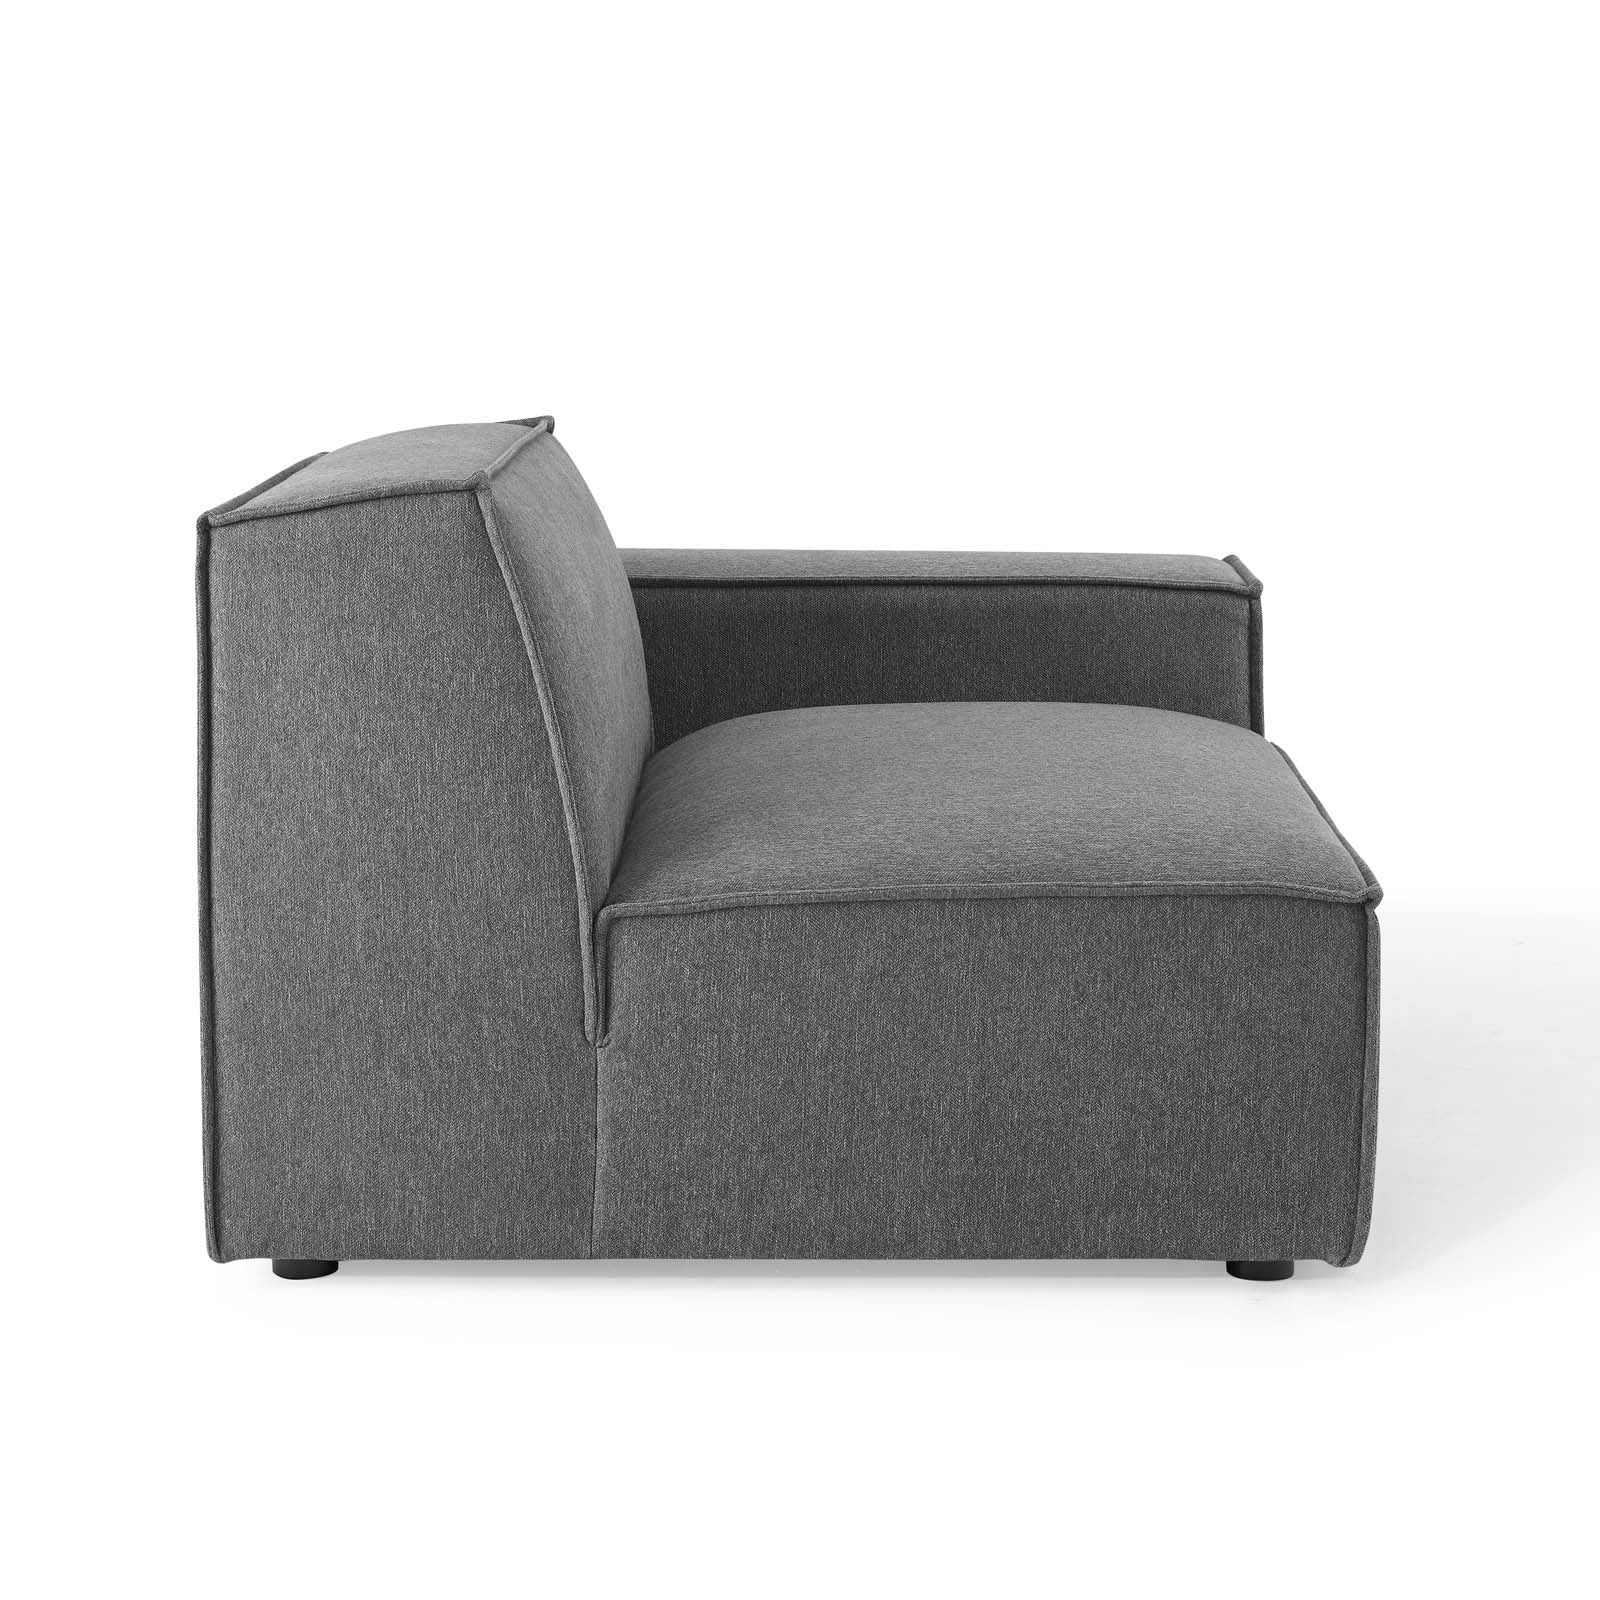 Modway Sectional Sofas - Restore 4-Piece Sectional Sofa Charcoal